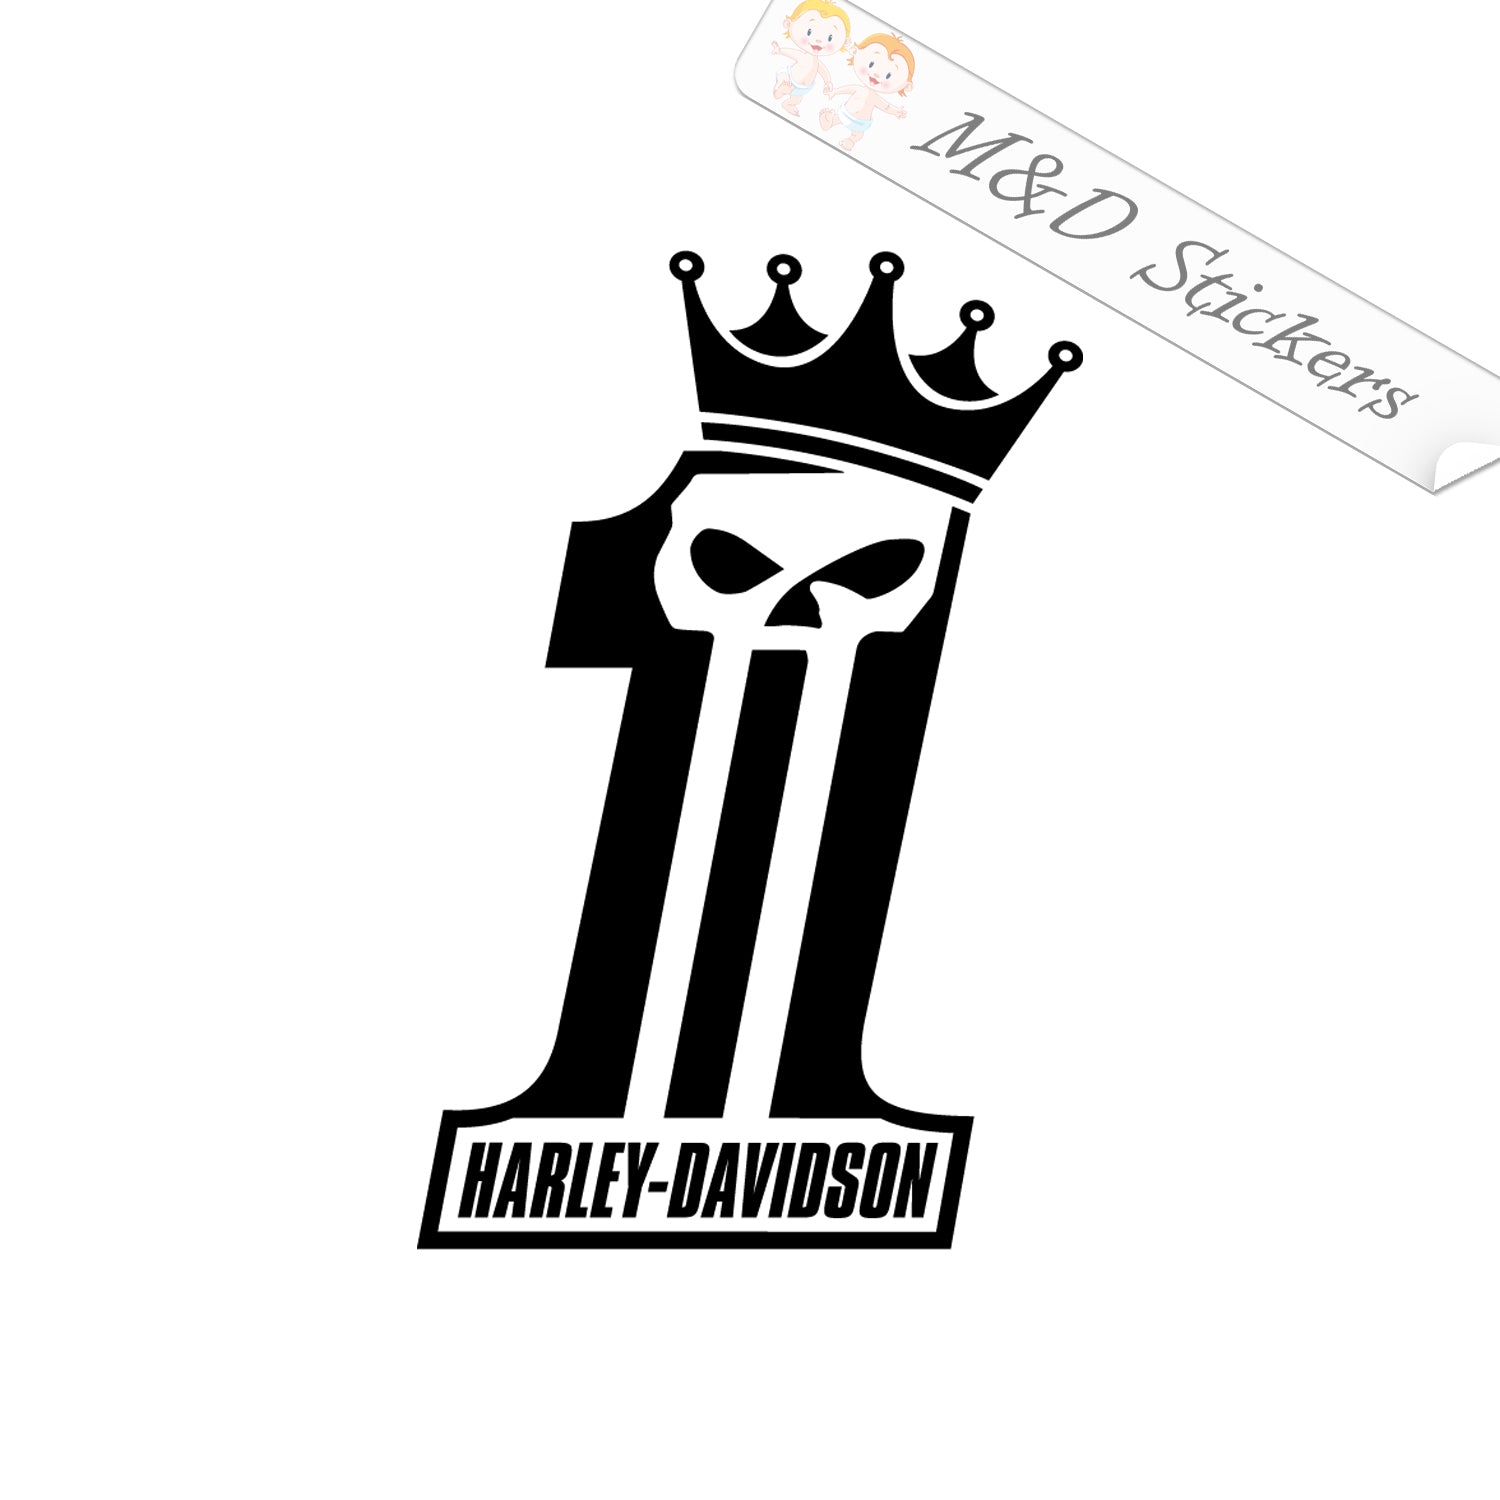 Number 11 1 Logo Vector & Photo (Free Trial) | Bigstock